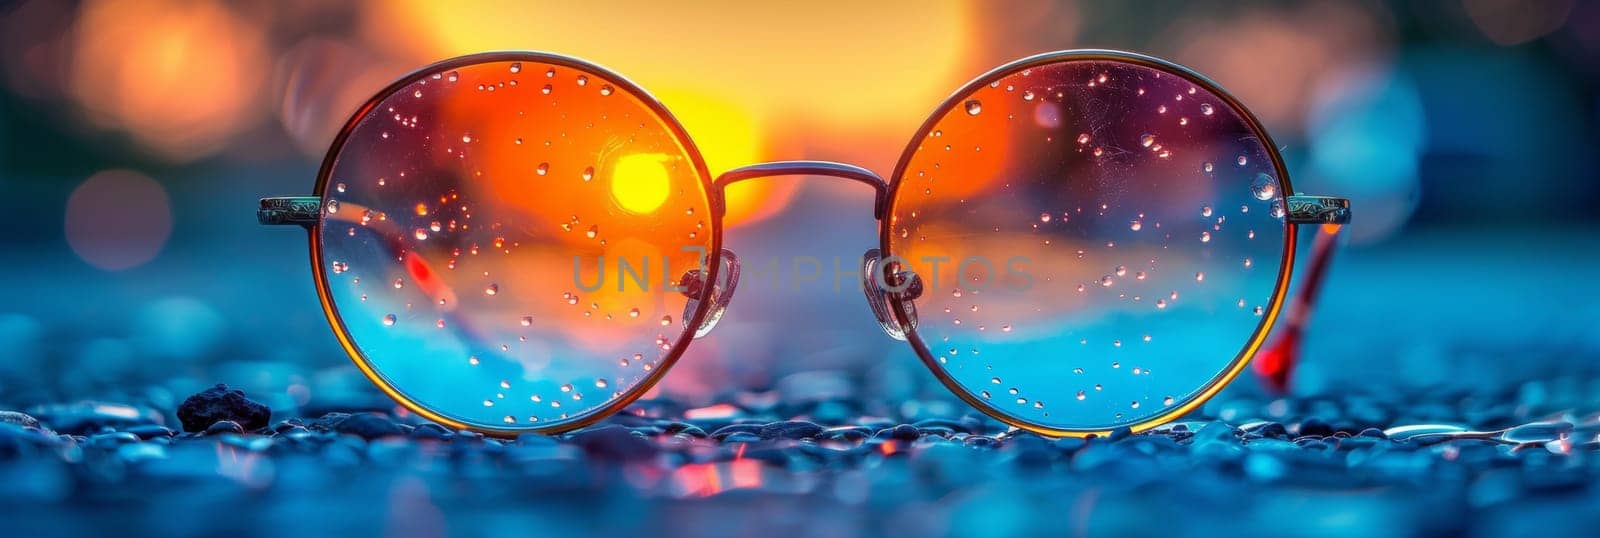 A pair of a close up shot of some sunglasses on the ground